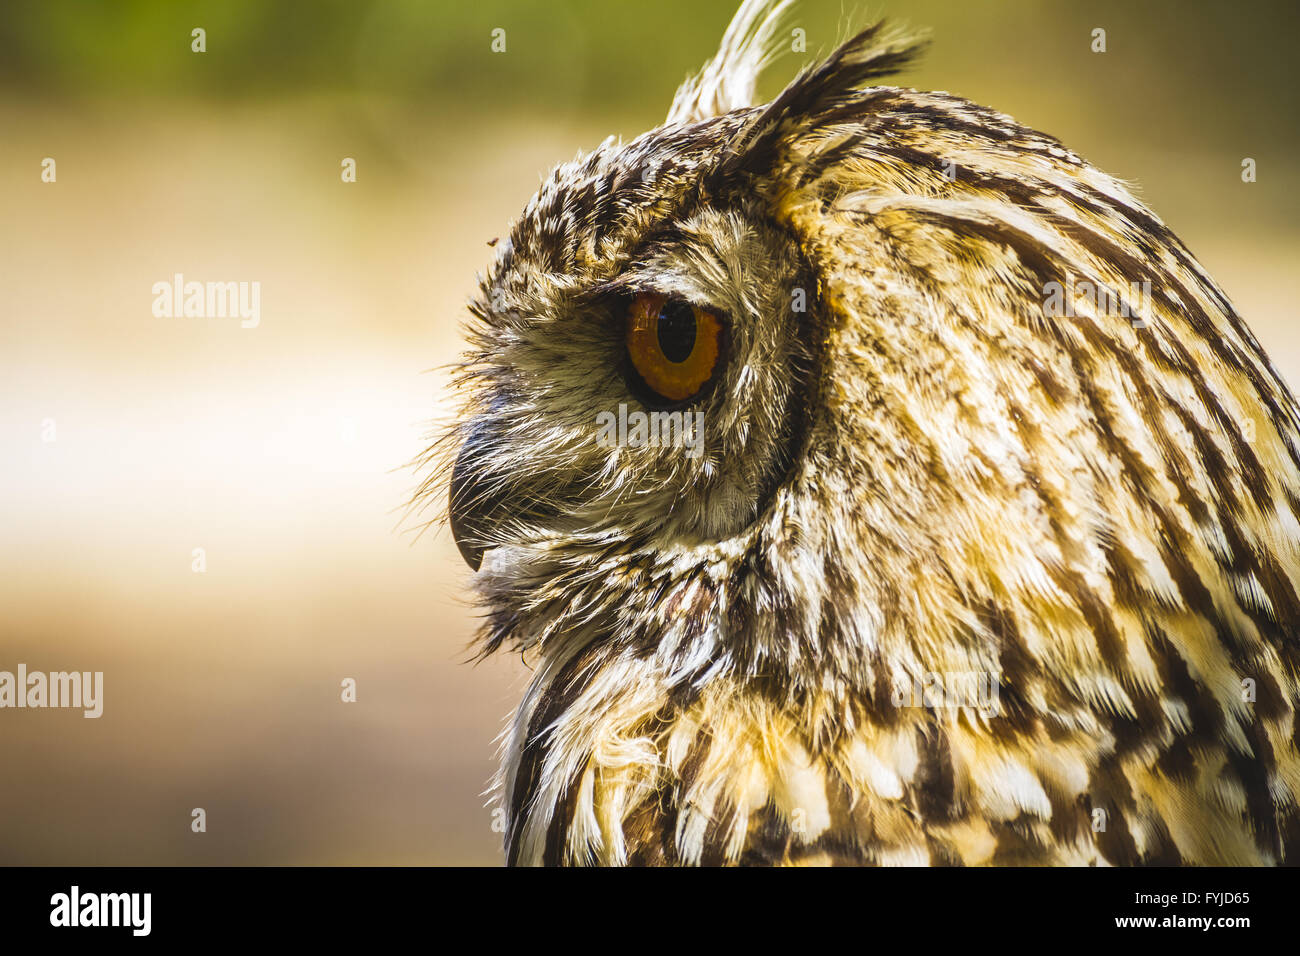 look, beautiful owl with intense eyes and beautiful plumage Stock Photo